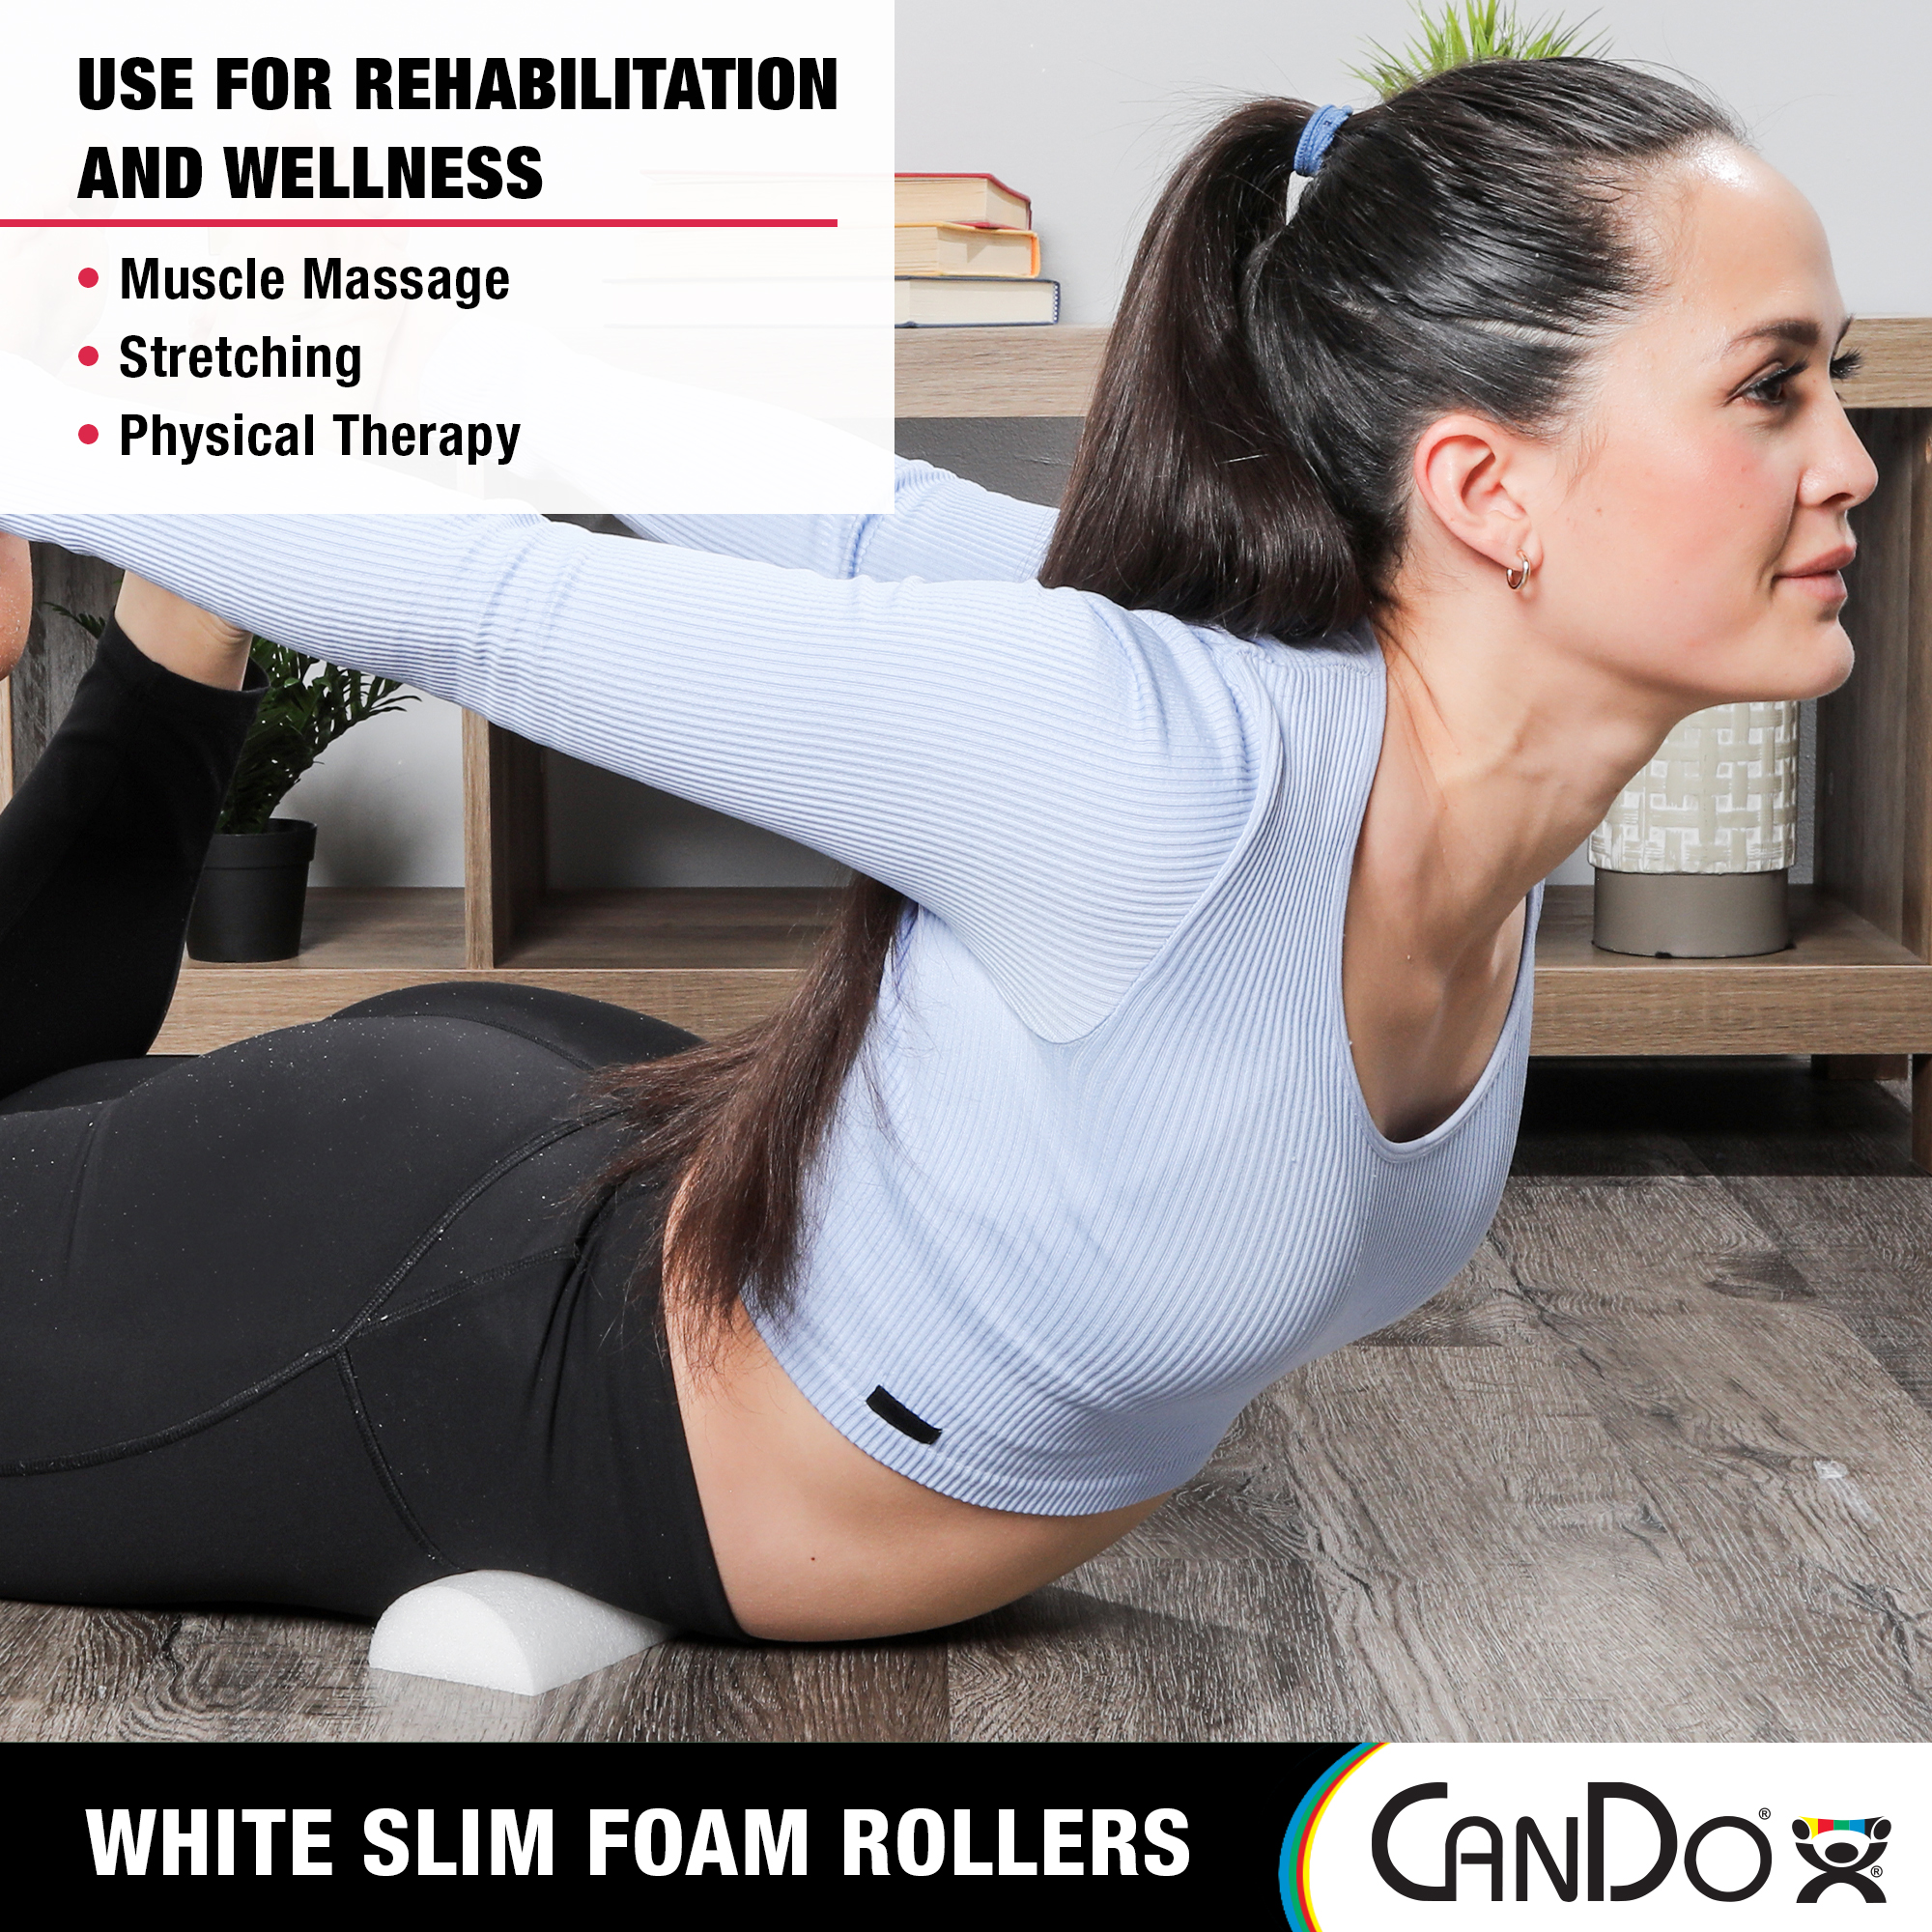 CanDo Slim White PE Foam Rollers for Exercise, Fitness, Muscle Restoration, Massage Therapy, Sport Recovery and Physical Therapy for Home, Clinics, Professional Therapy 3" x 36" Half-Round - image 4 of 6